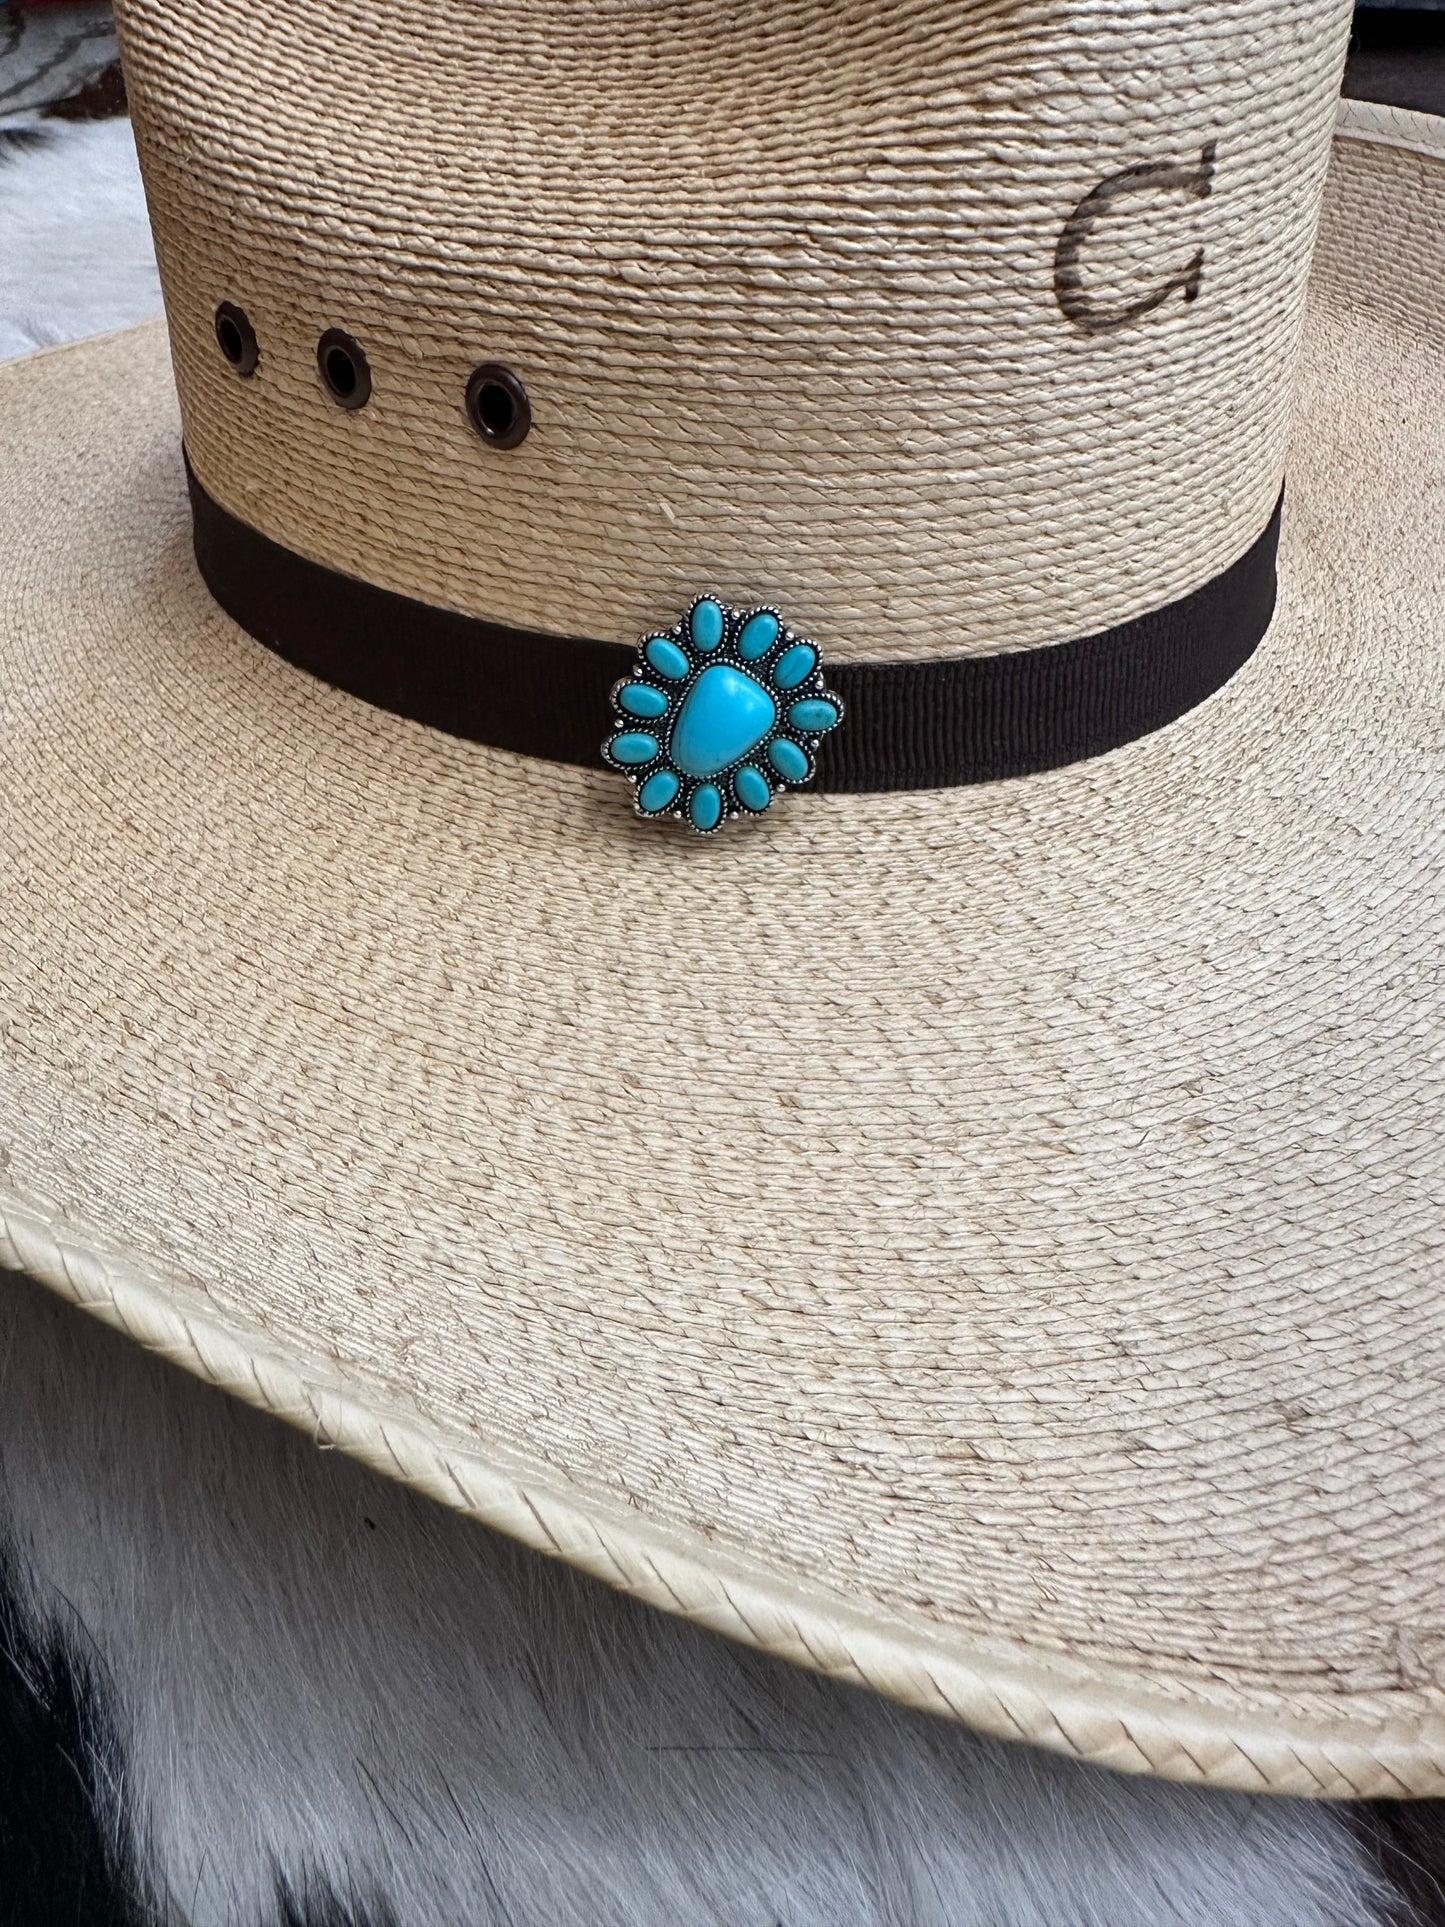 The Crazy 'Bout Turquoise Hat Pin